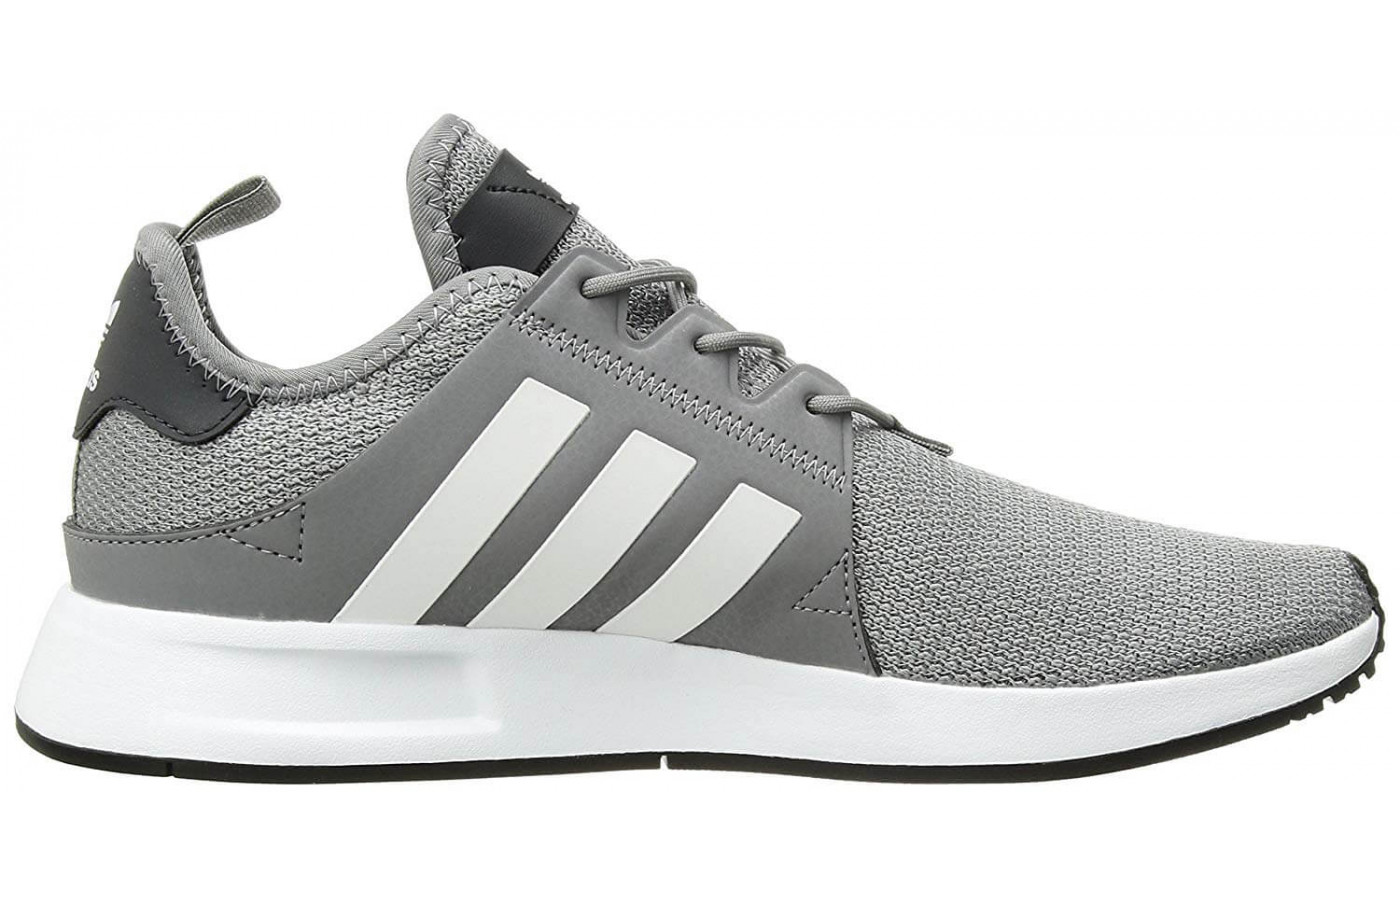 The Adidas X_PLR offers a mesh lining